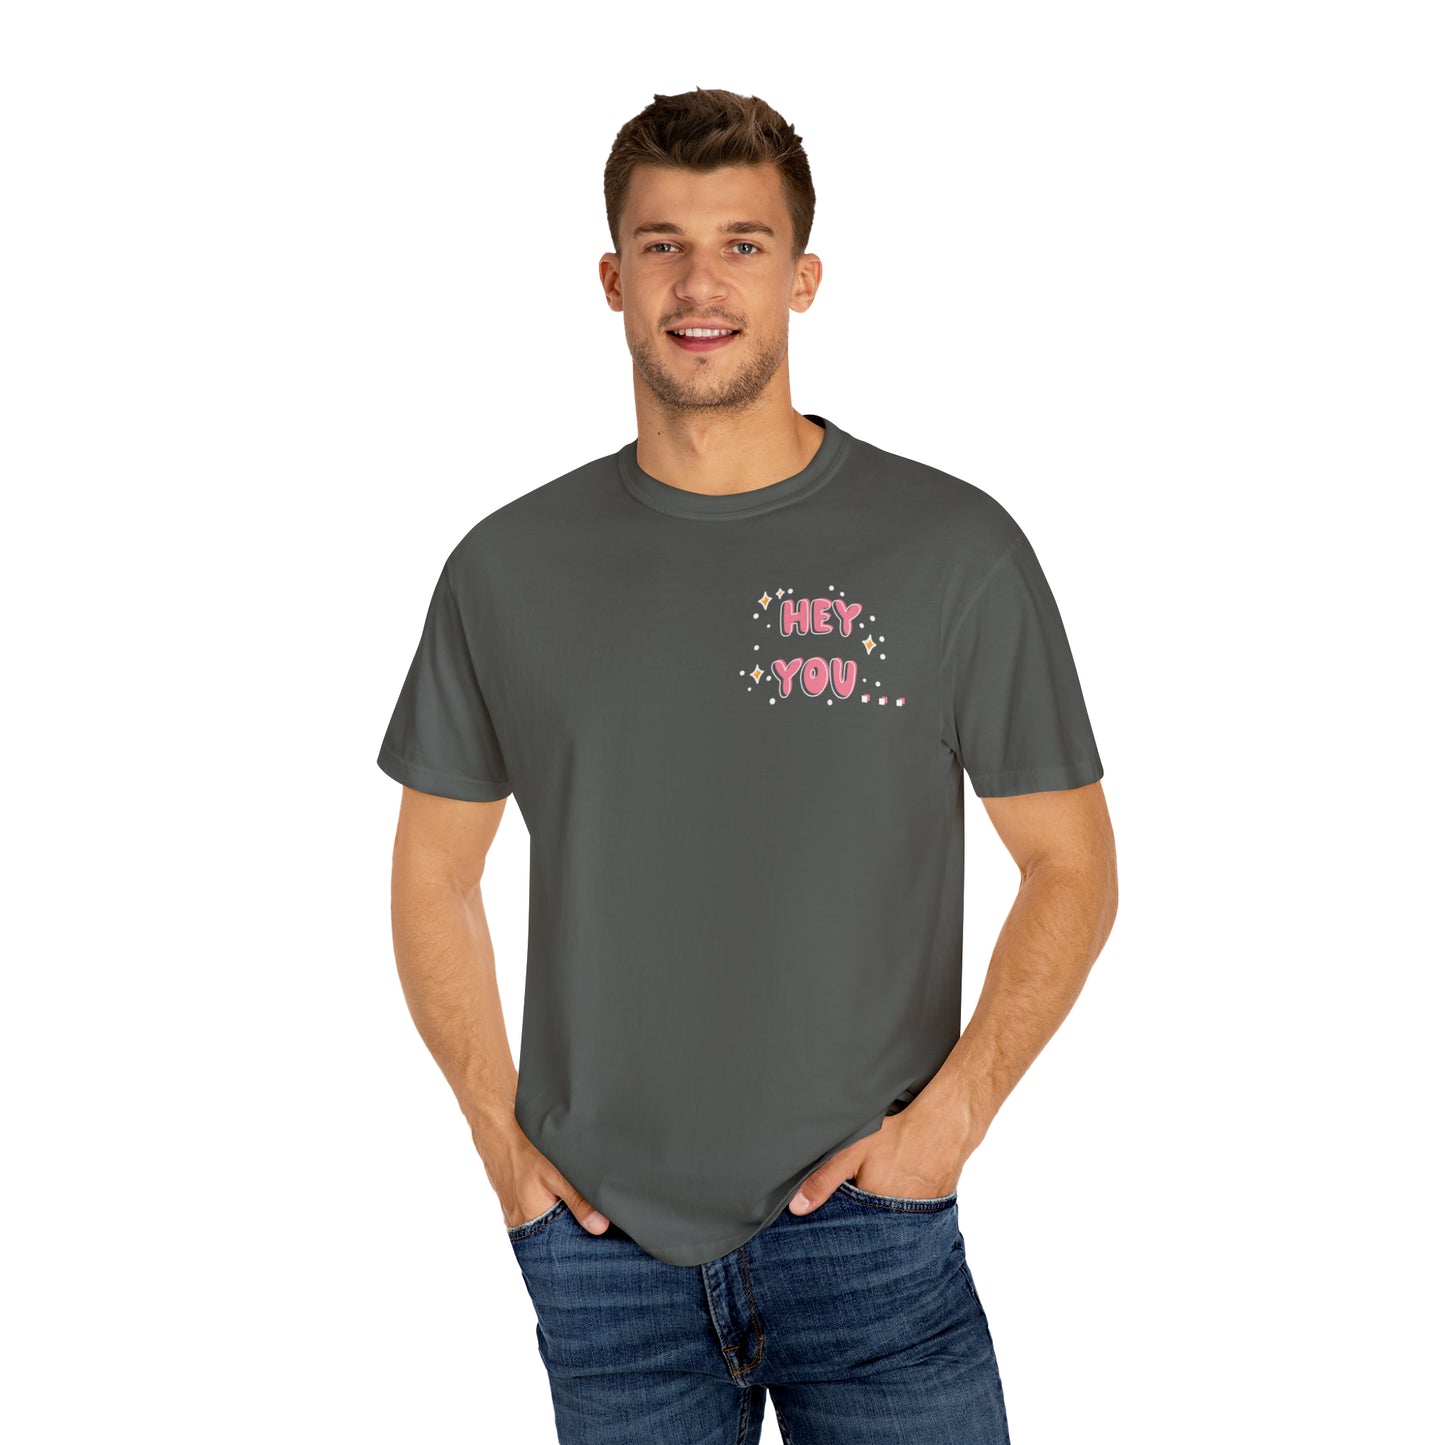 Hey you - you can do hard things - Tee - Comfort Colors